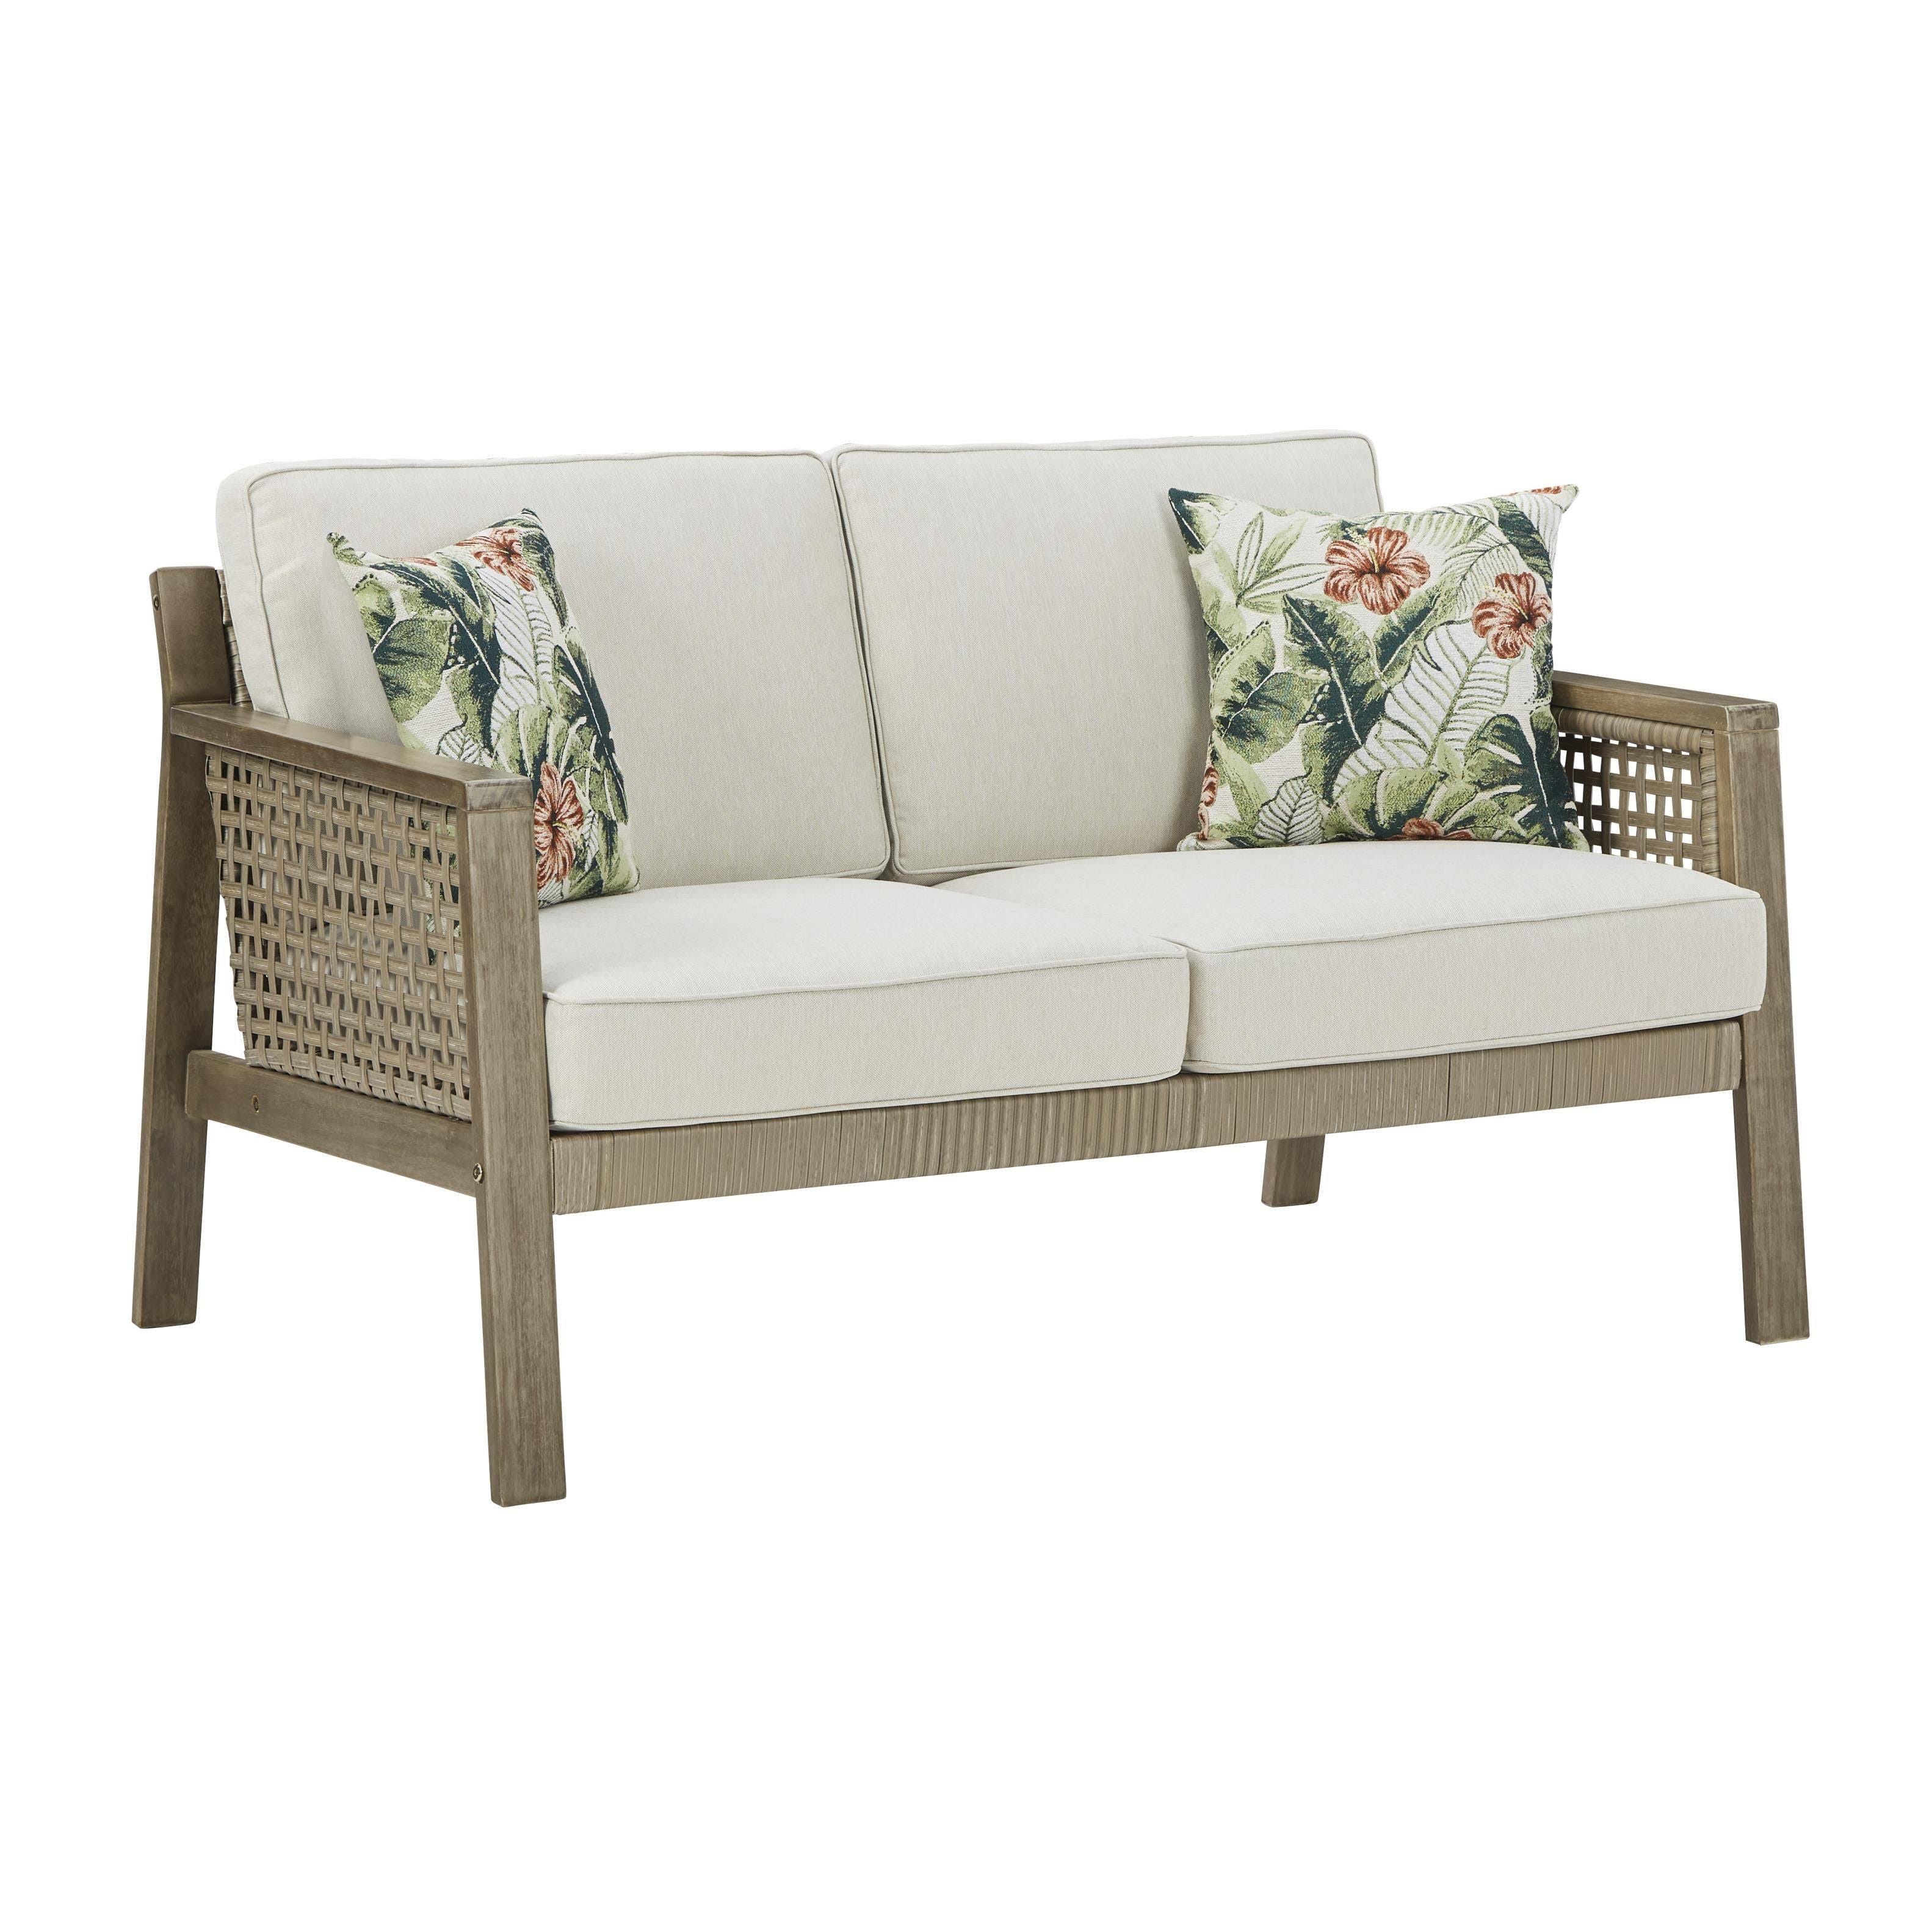 Ashley Barn Cove Brown Loveseat for Outdoor Relaxation | Image